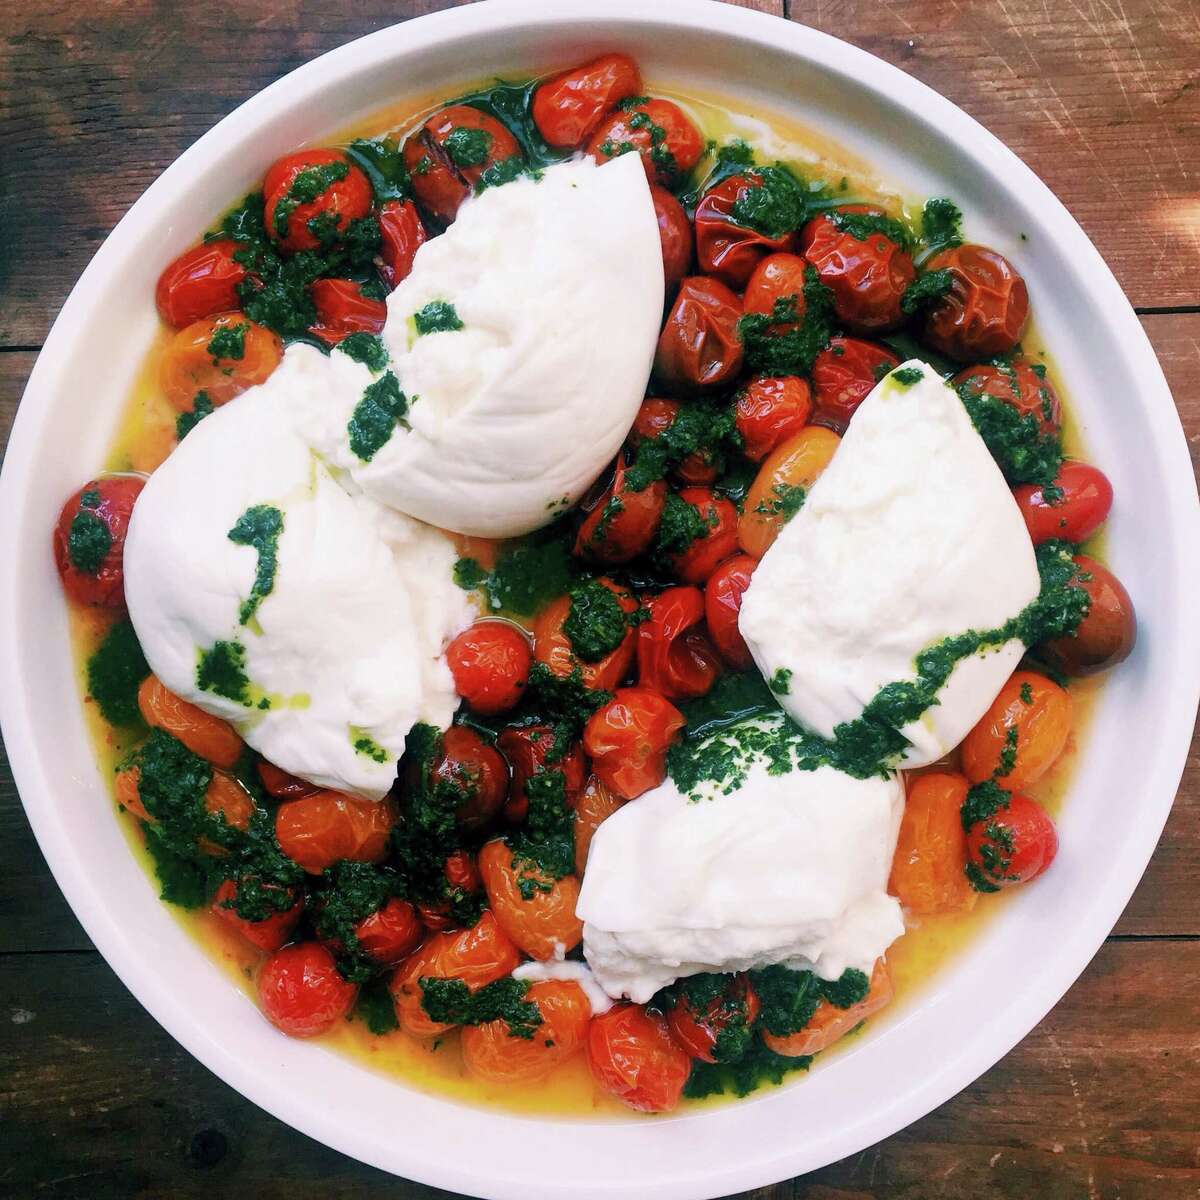 If you have never tried burrata, go out and find some and then make roasted cherry tomatoes with burrata and basil oil.